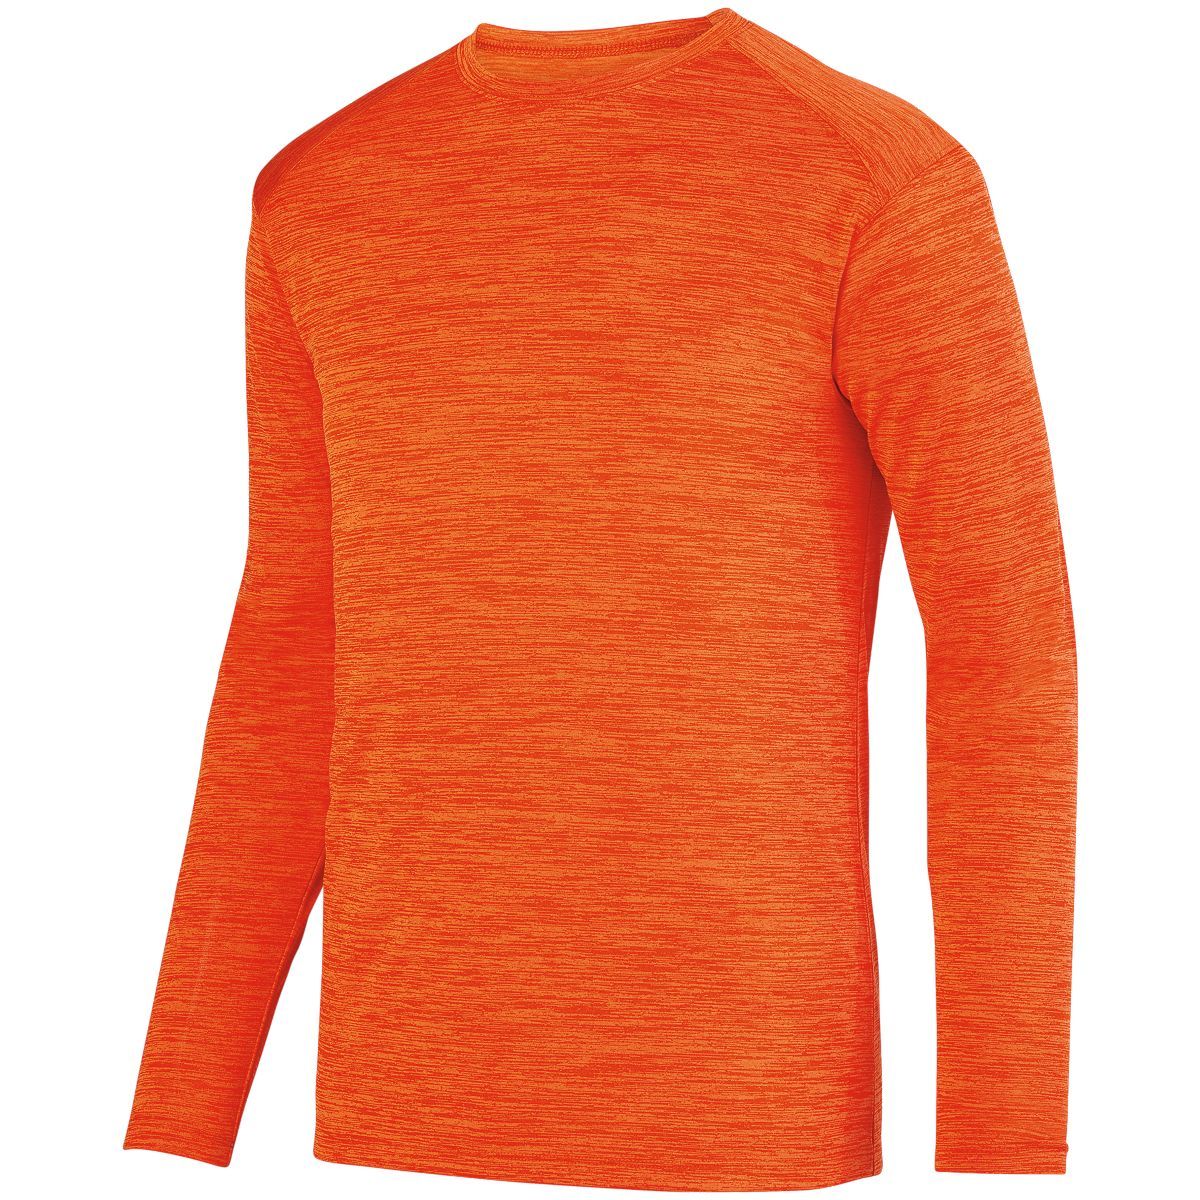 Augusta Sportswear Shadow Tonal Heather Long Sleeve Tee in Orange  -Part of the Adult, Adult-Tee-Shirt, T-Shirts, Augusta-Products, Shirts, Tonal-Fleece-Collection product lines at KanaleyCreations.com